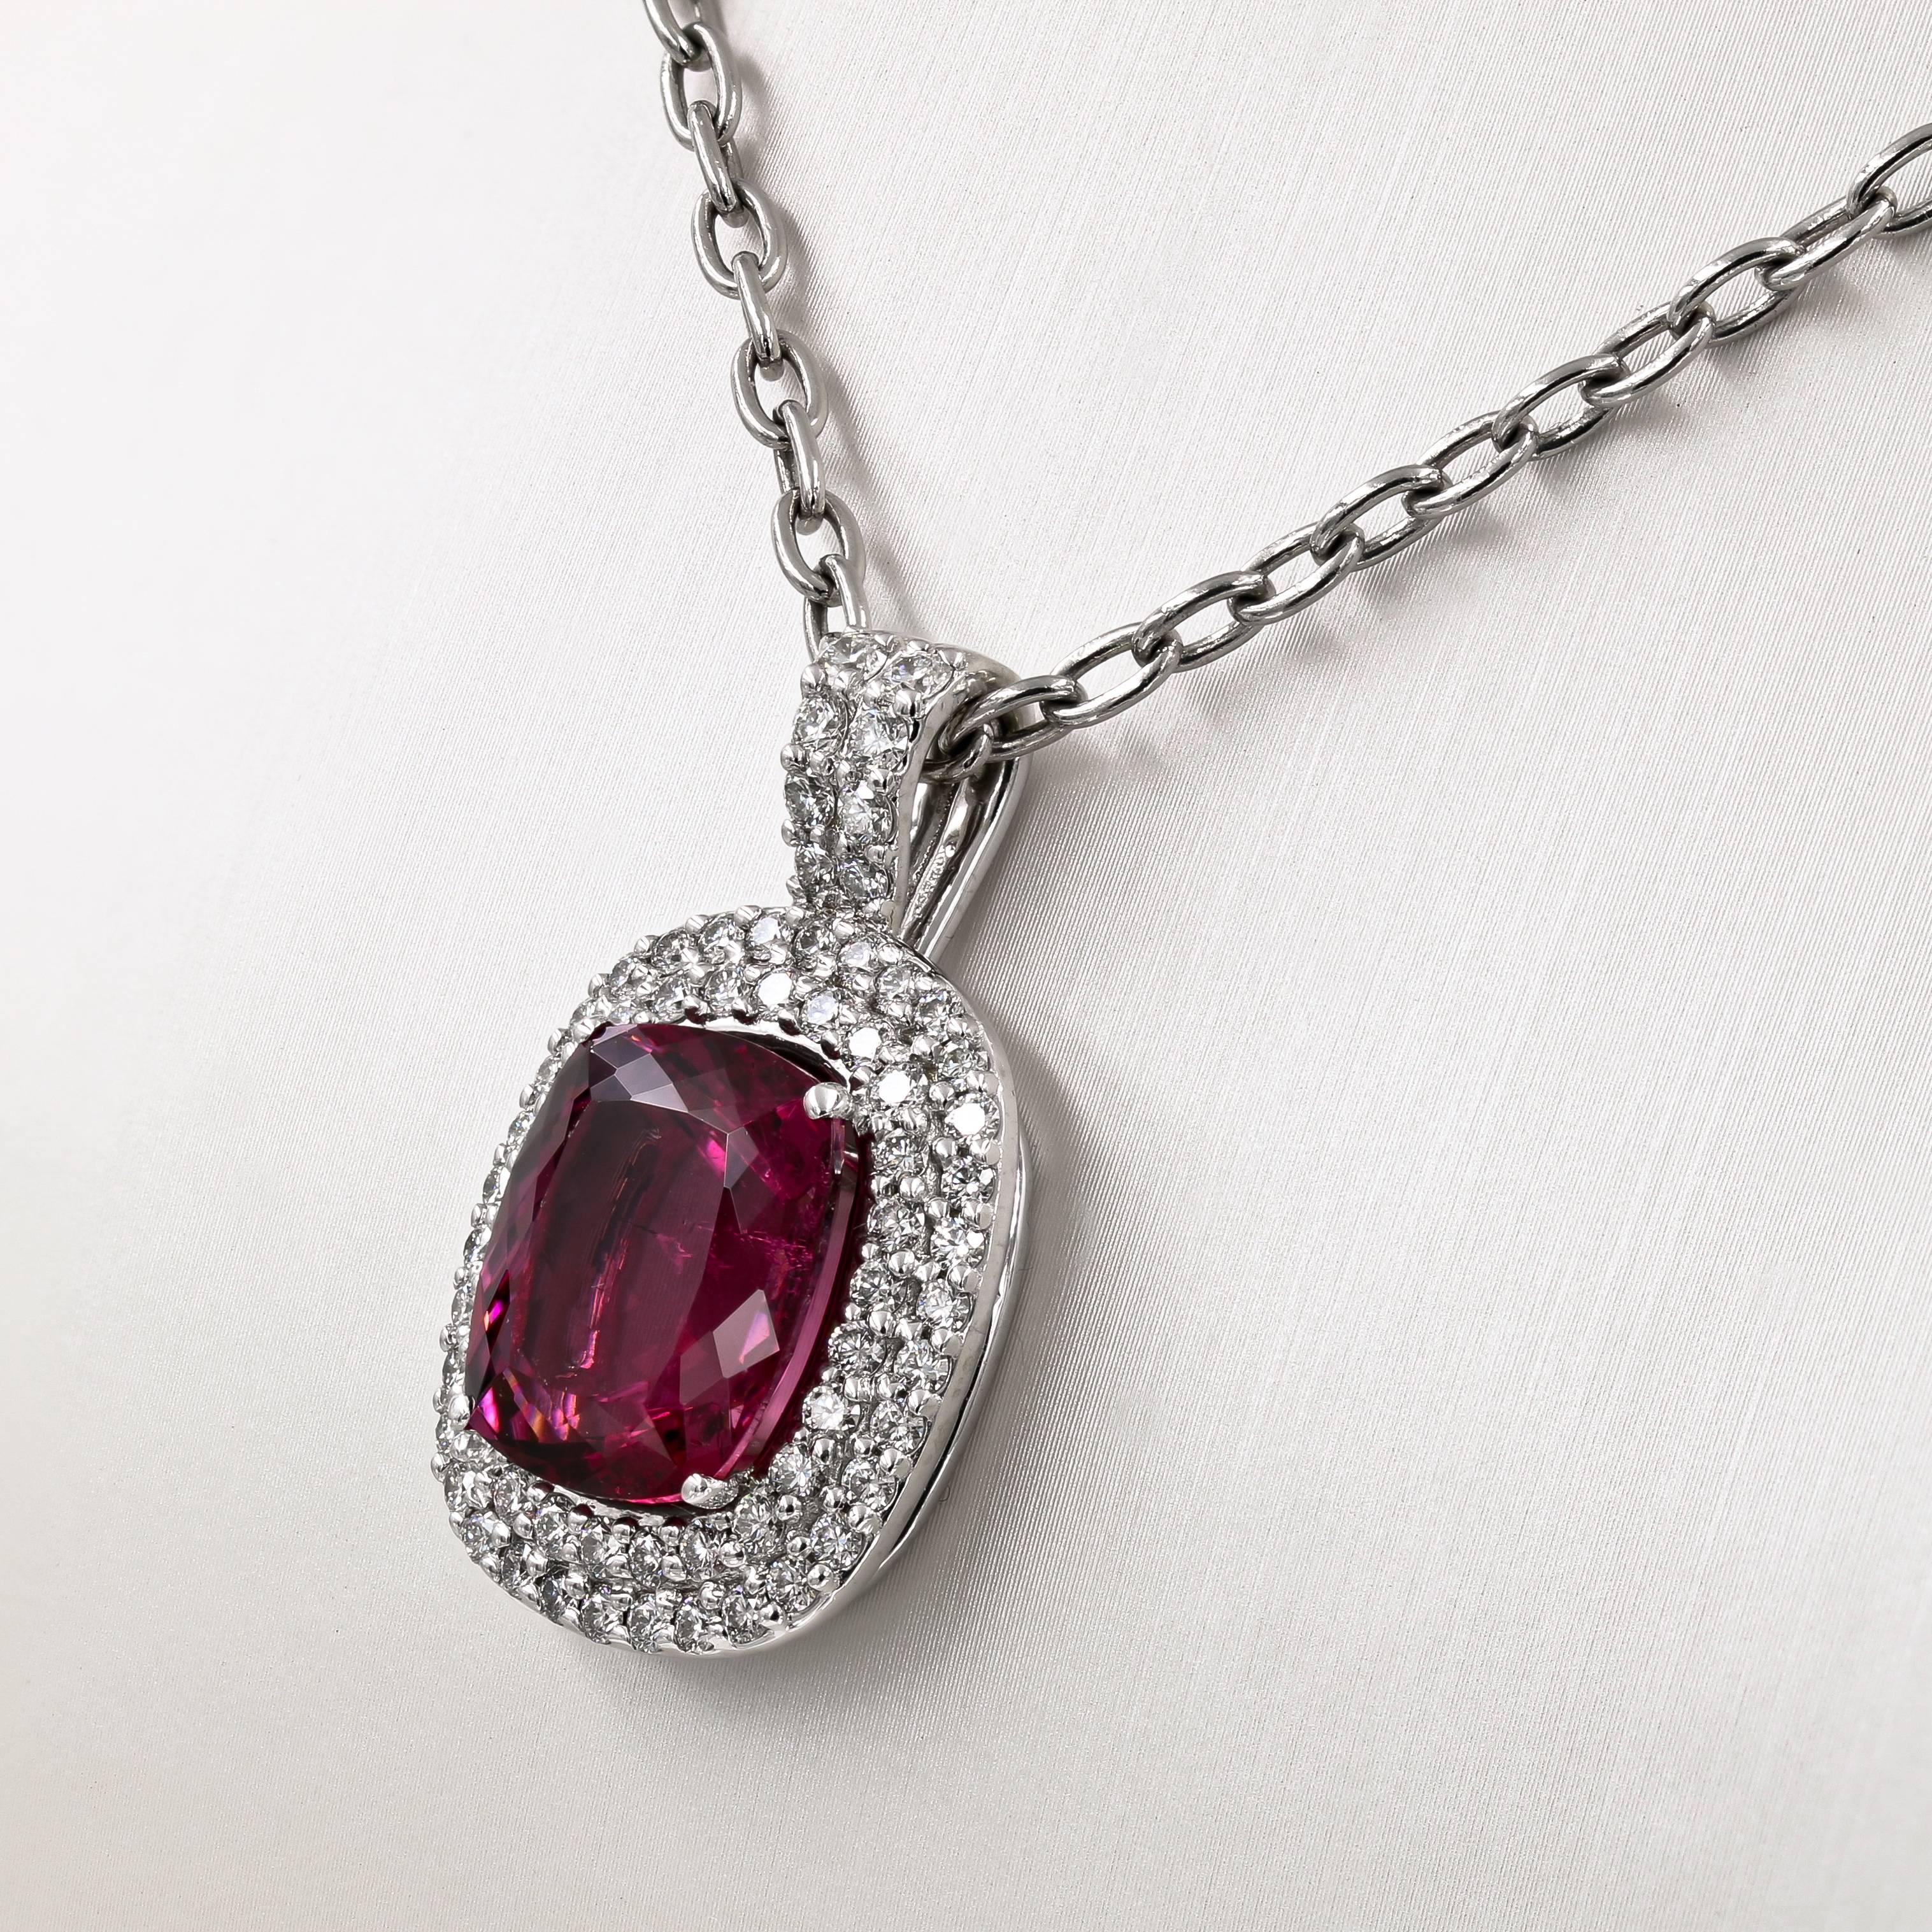 This spectacular 10.91cts. natural tourmaline is Burgundy in color, and is originally from Madagascar. Set in 18kt. white gold, it is surrounded by 68 ideal cut round diamonds= 1.72cts. t.w. The diamonds are GH color and VS clarity. The piece is